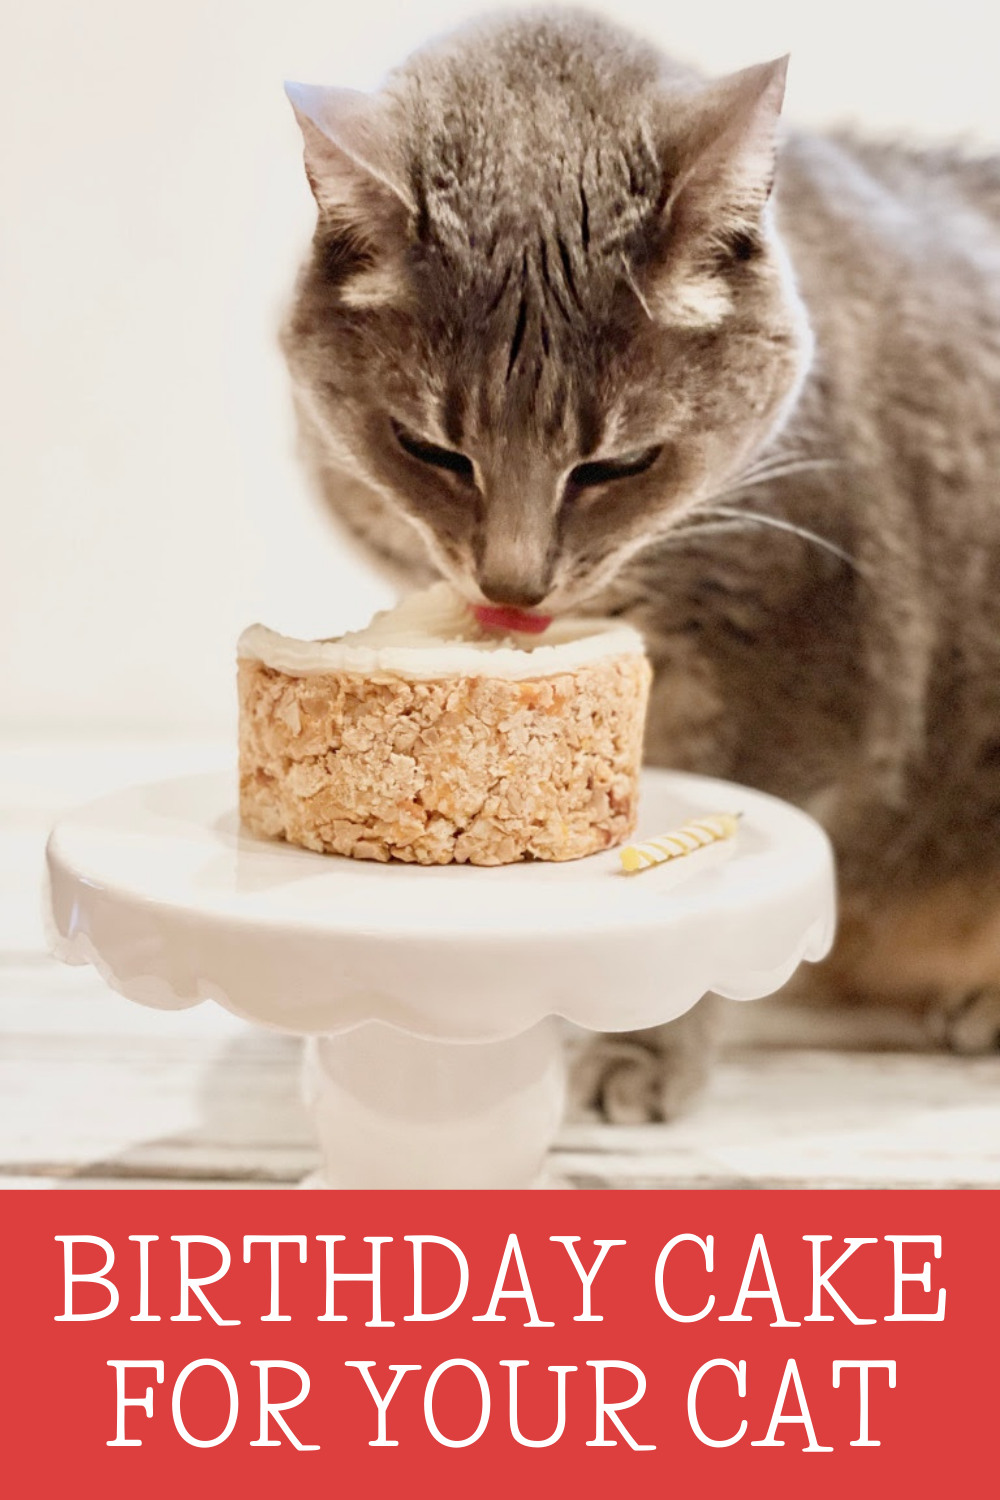 Birthday Cake For Your Cat ~ 4 simple ingredients are all you needed for a plant-based treat filled with your cat's favorite meaty flavors!  via @thiswifecooks